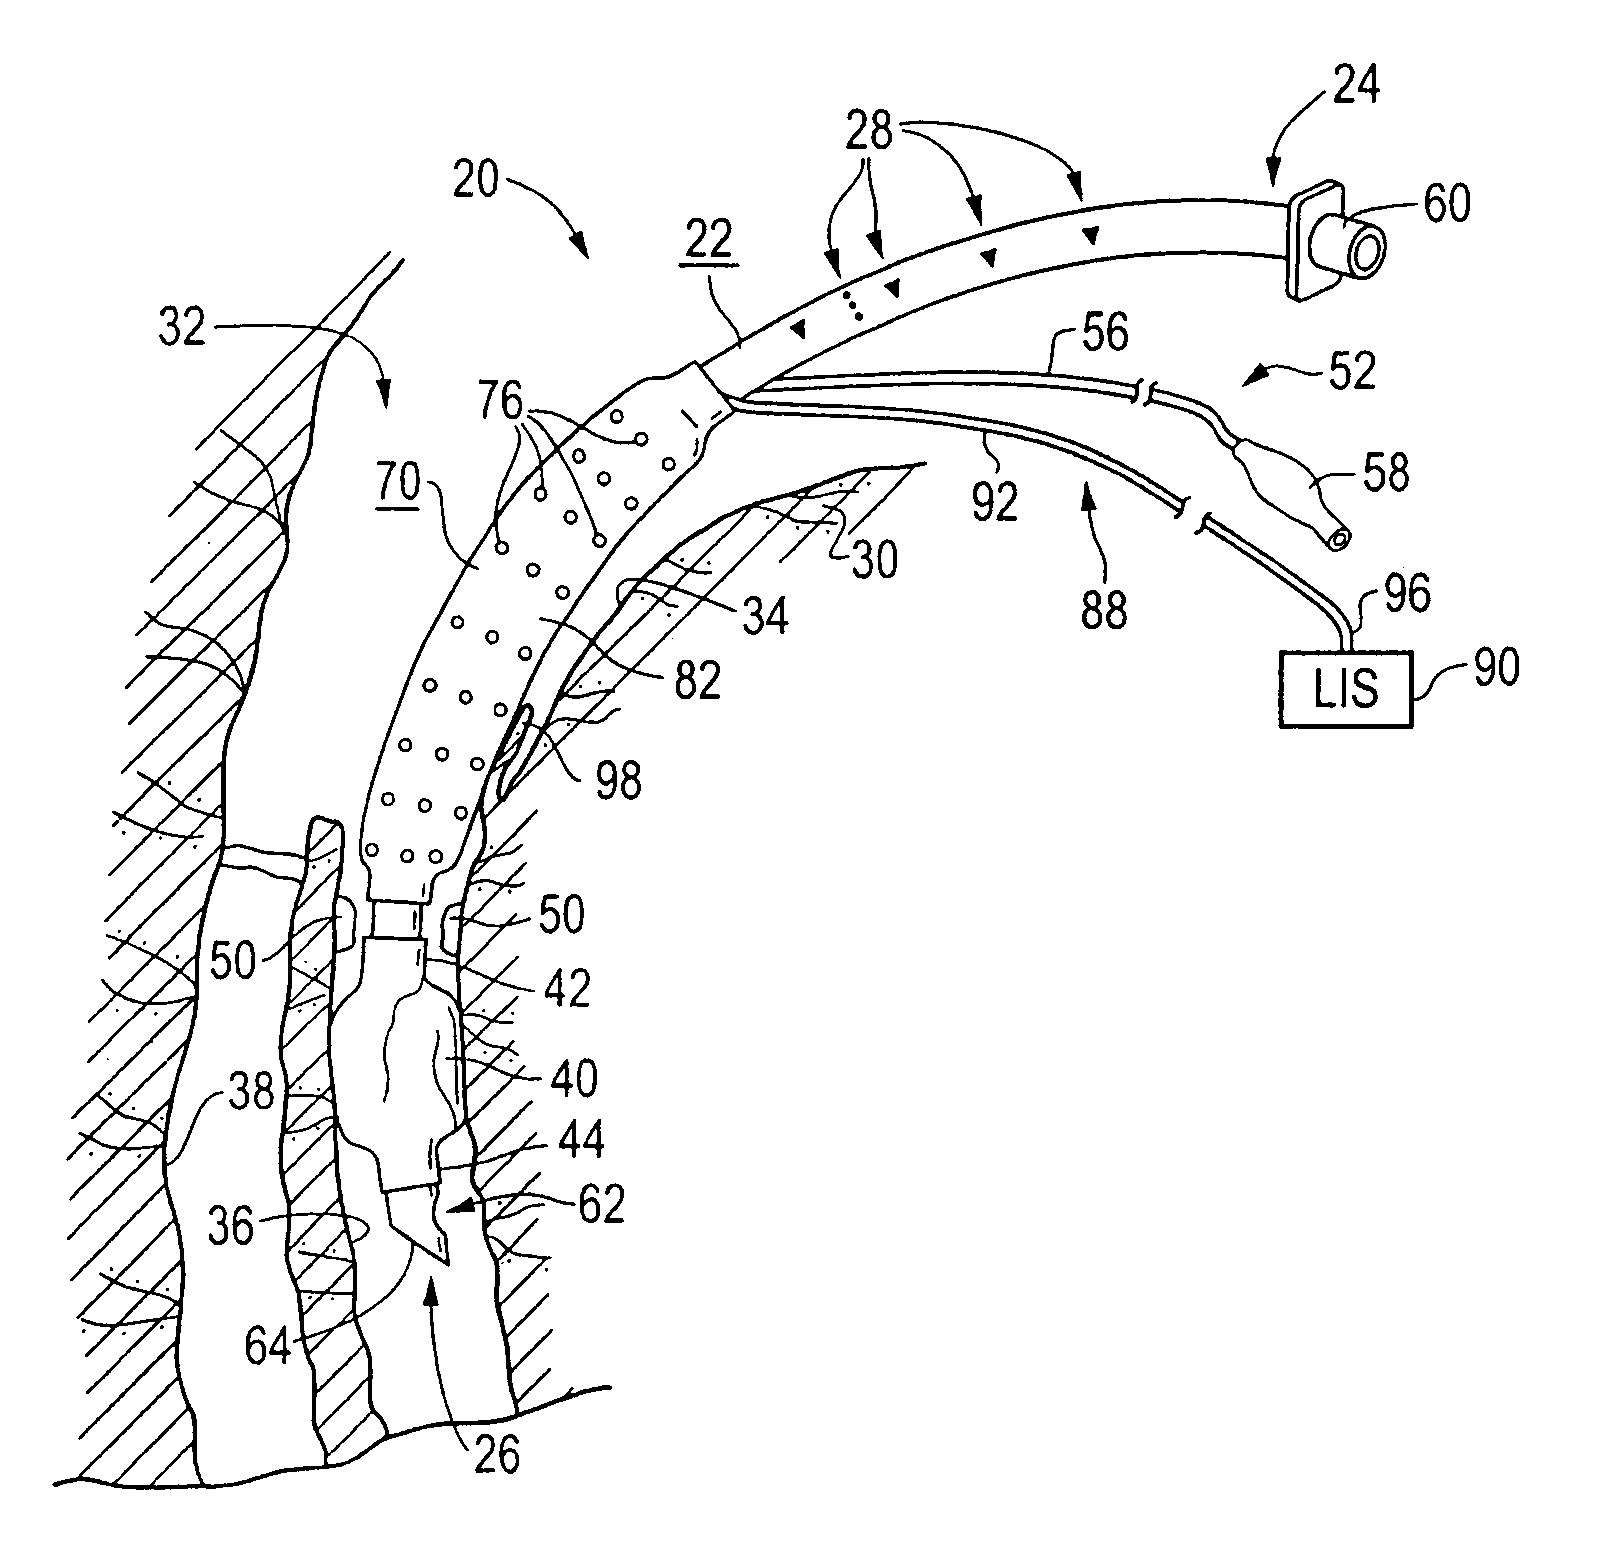 Endotracheal tube with suction attachment